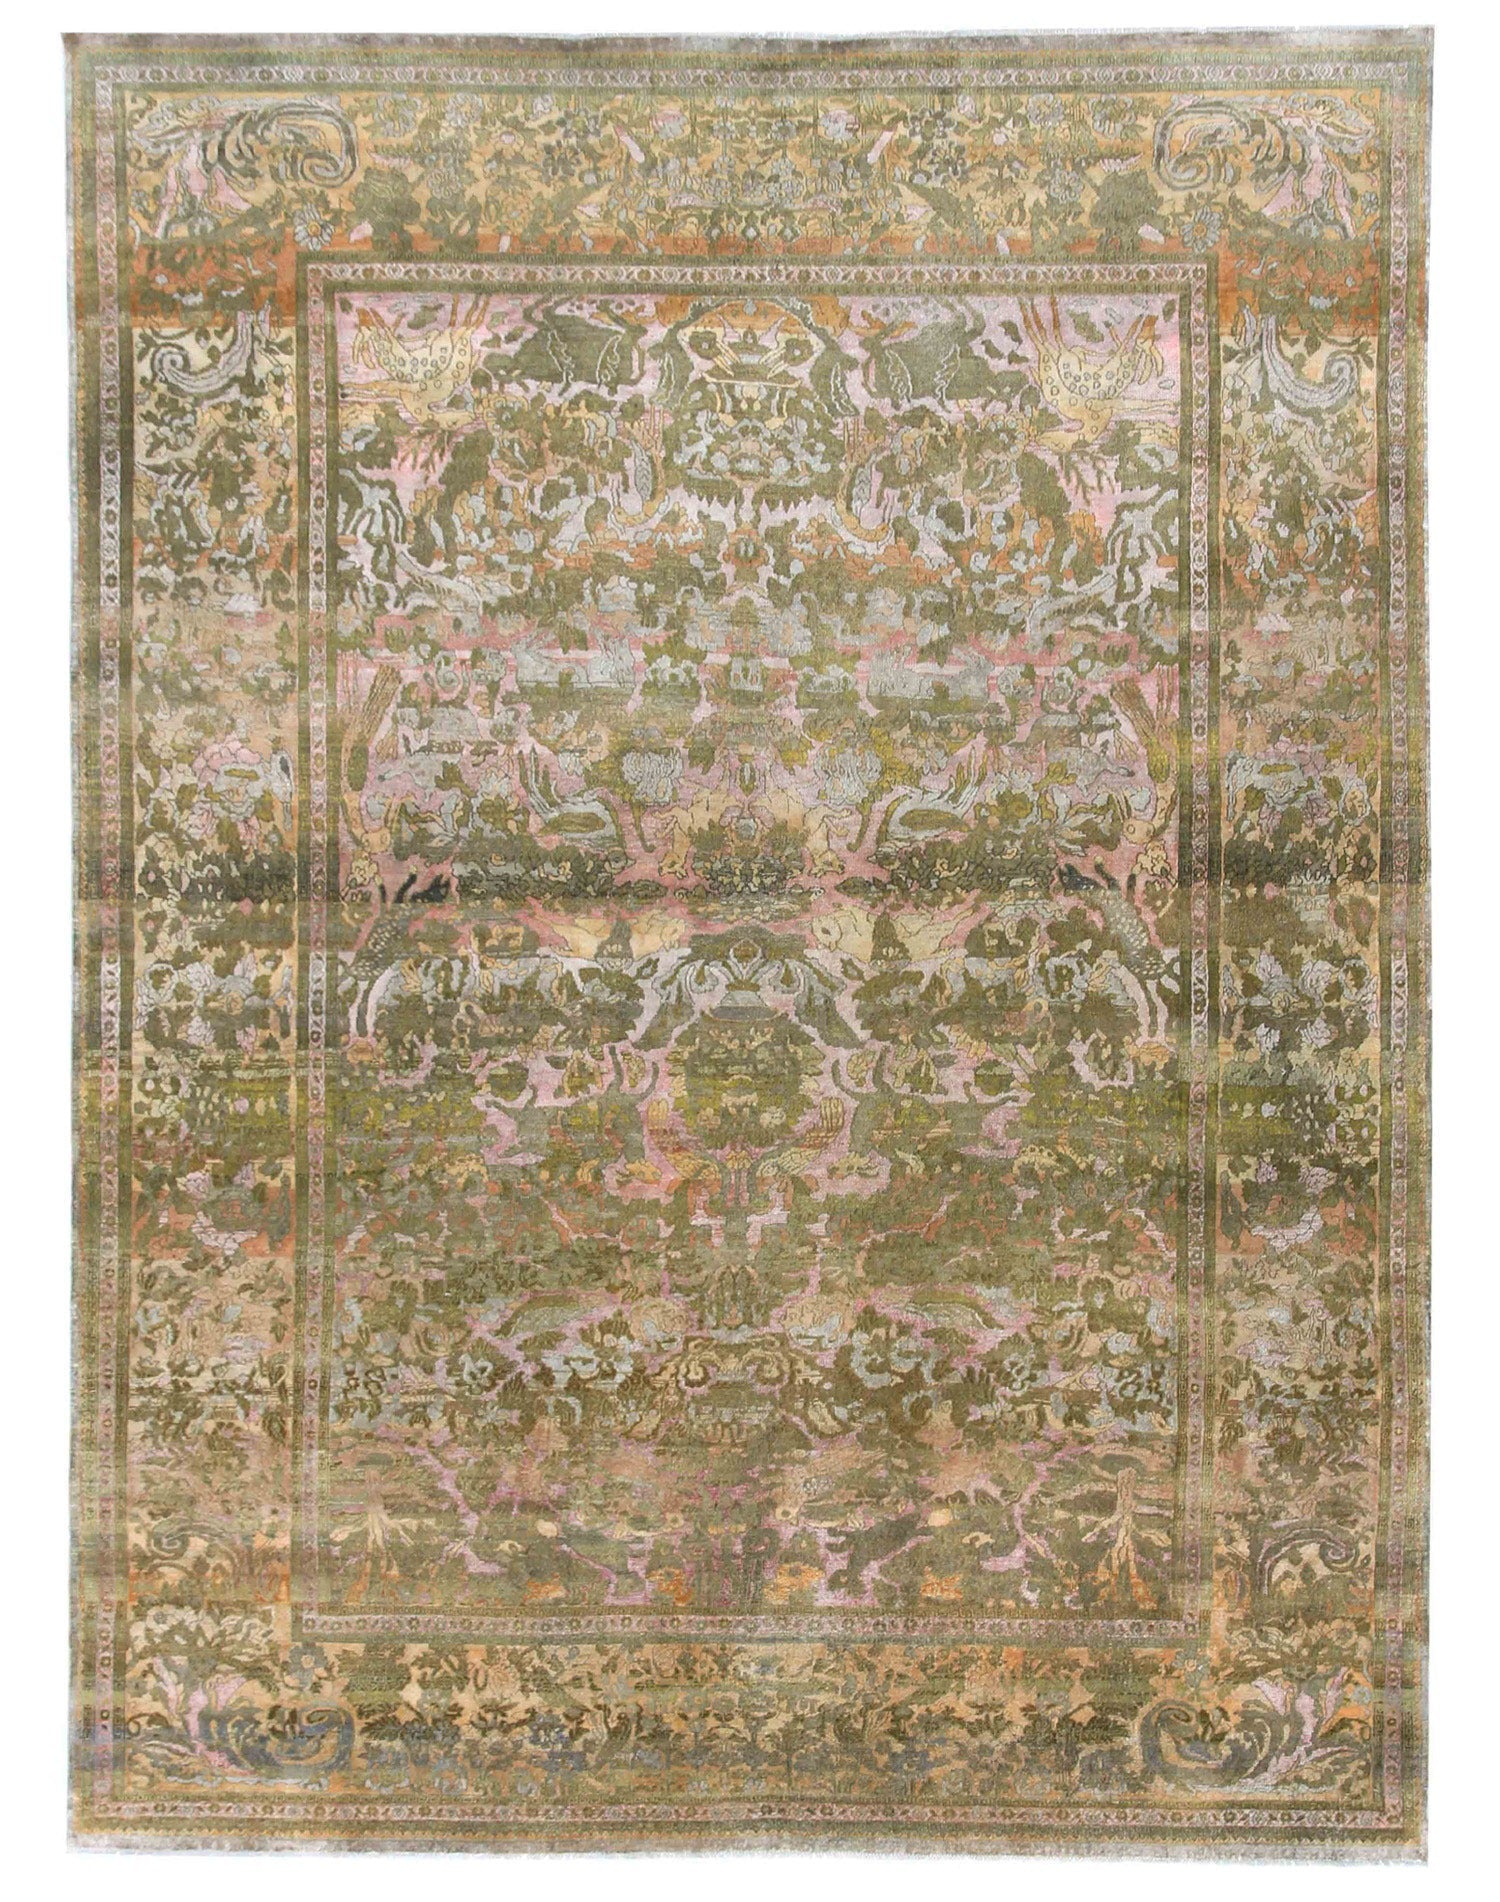 Hunting Handwoven Transitional Rug